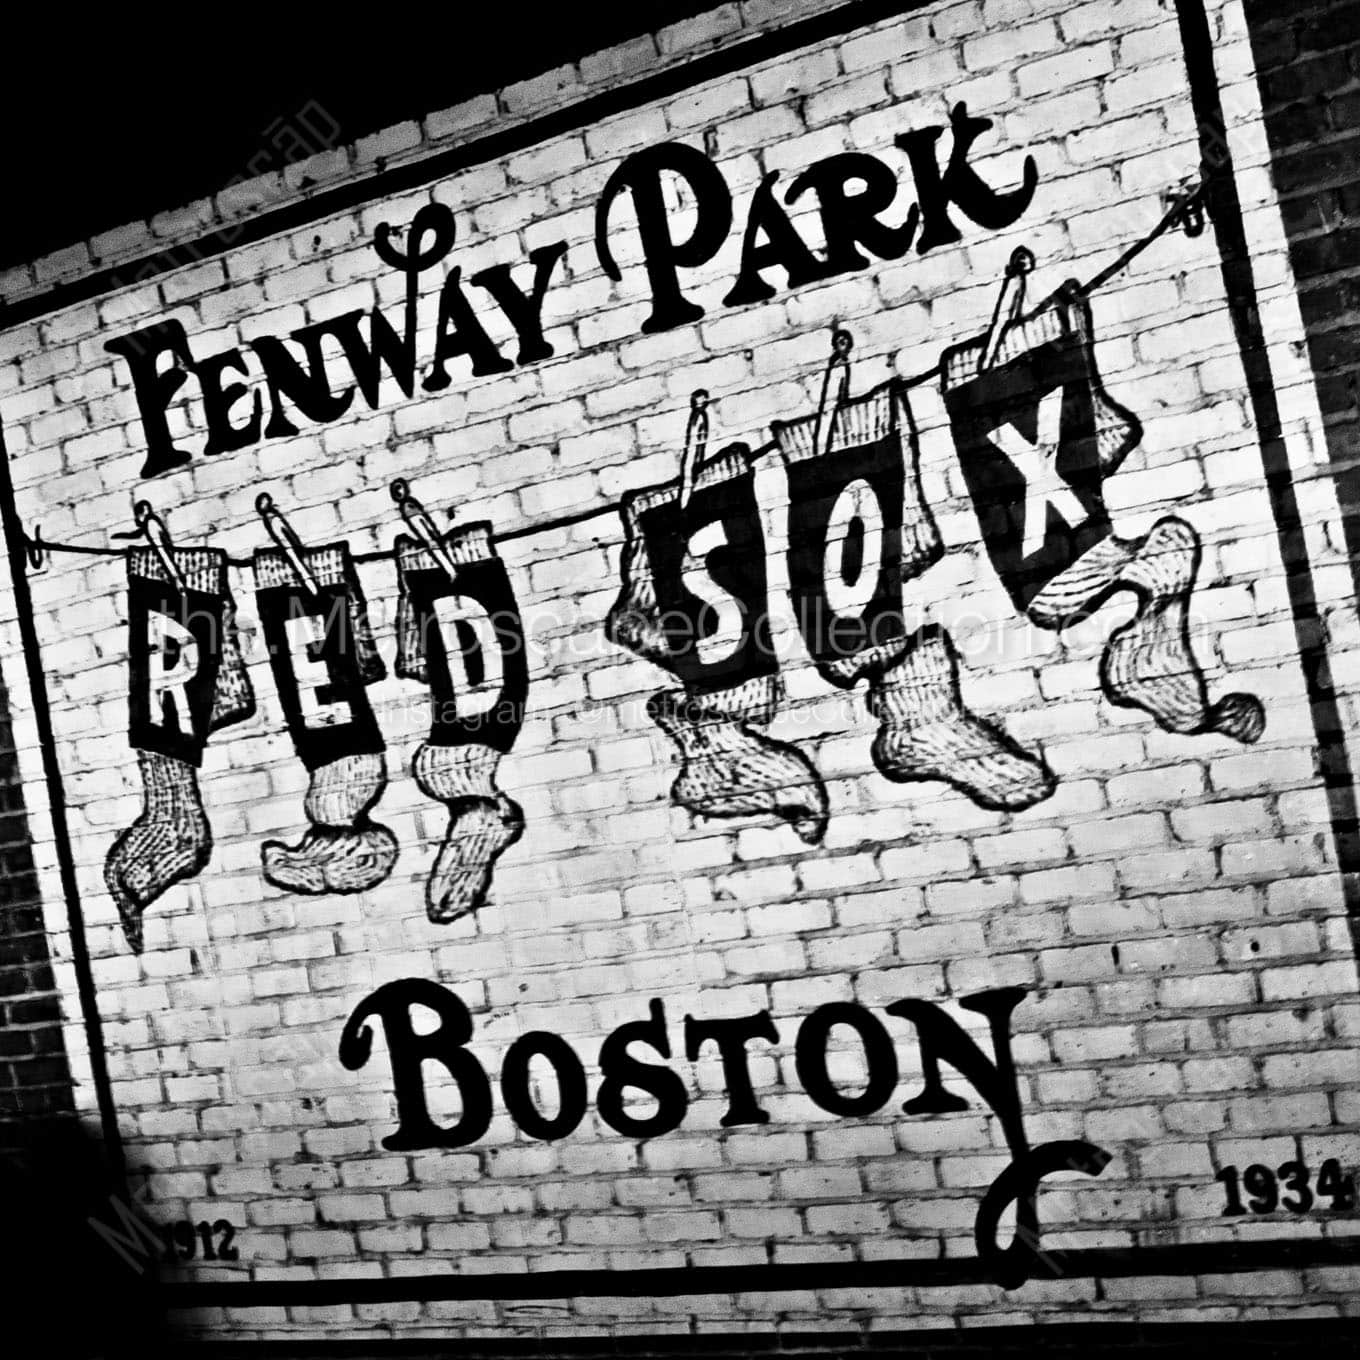 boston red sox wall mural in fenway park Black & White Wall Art